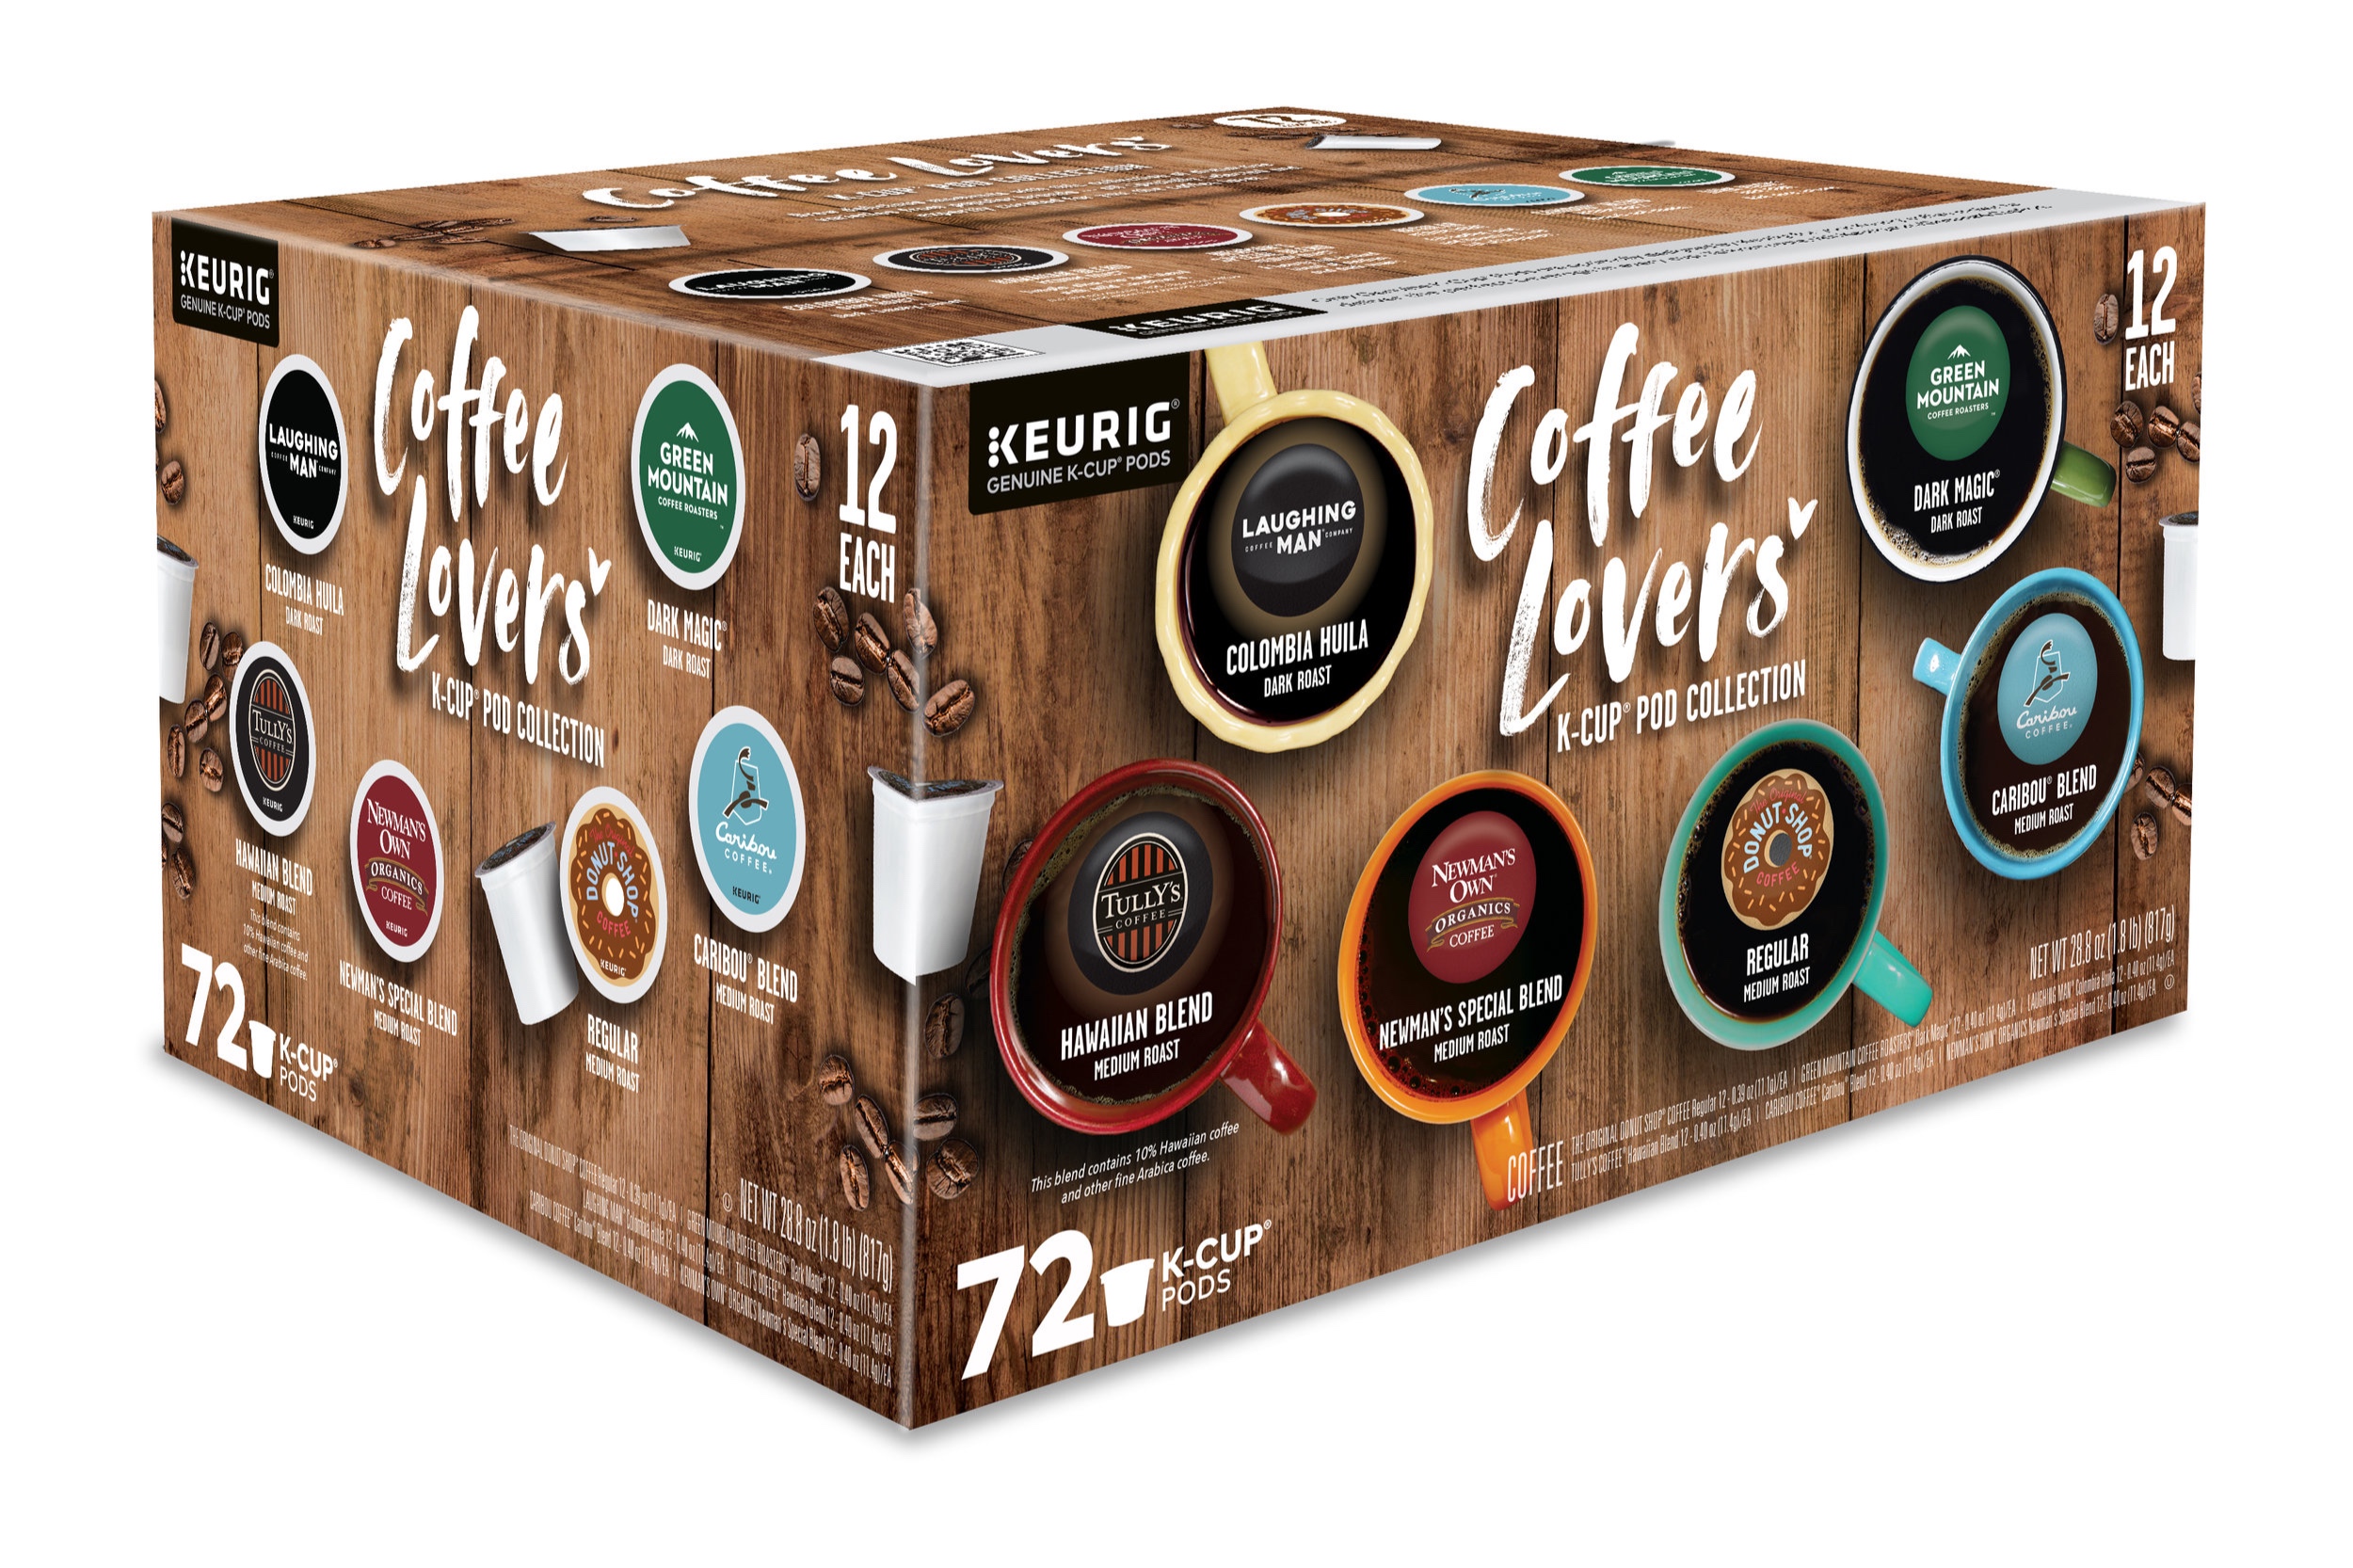 COSTCO COFFEE LOVERS' COLLECTION